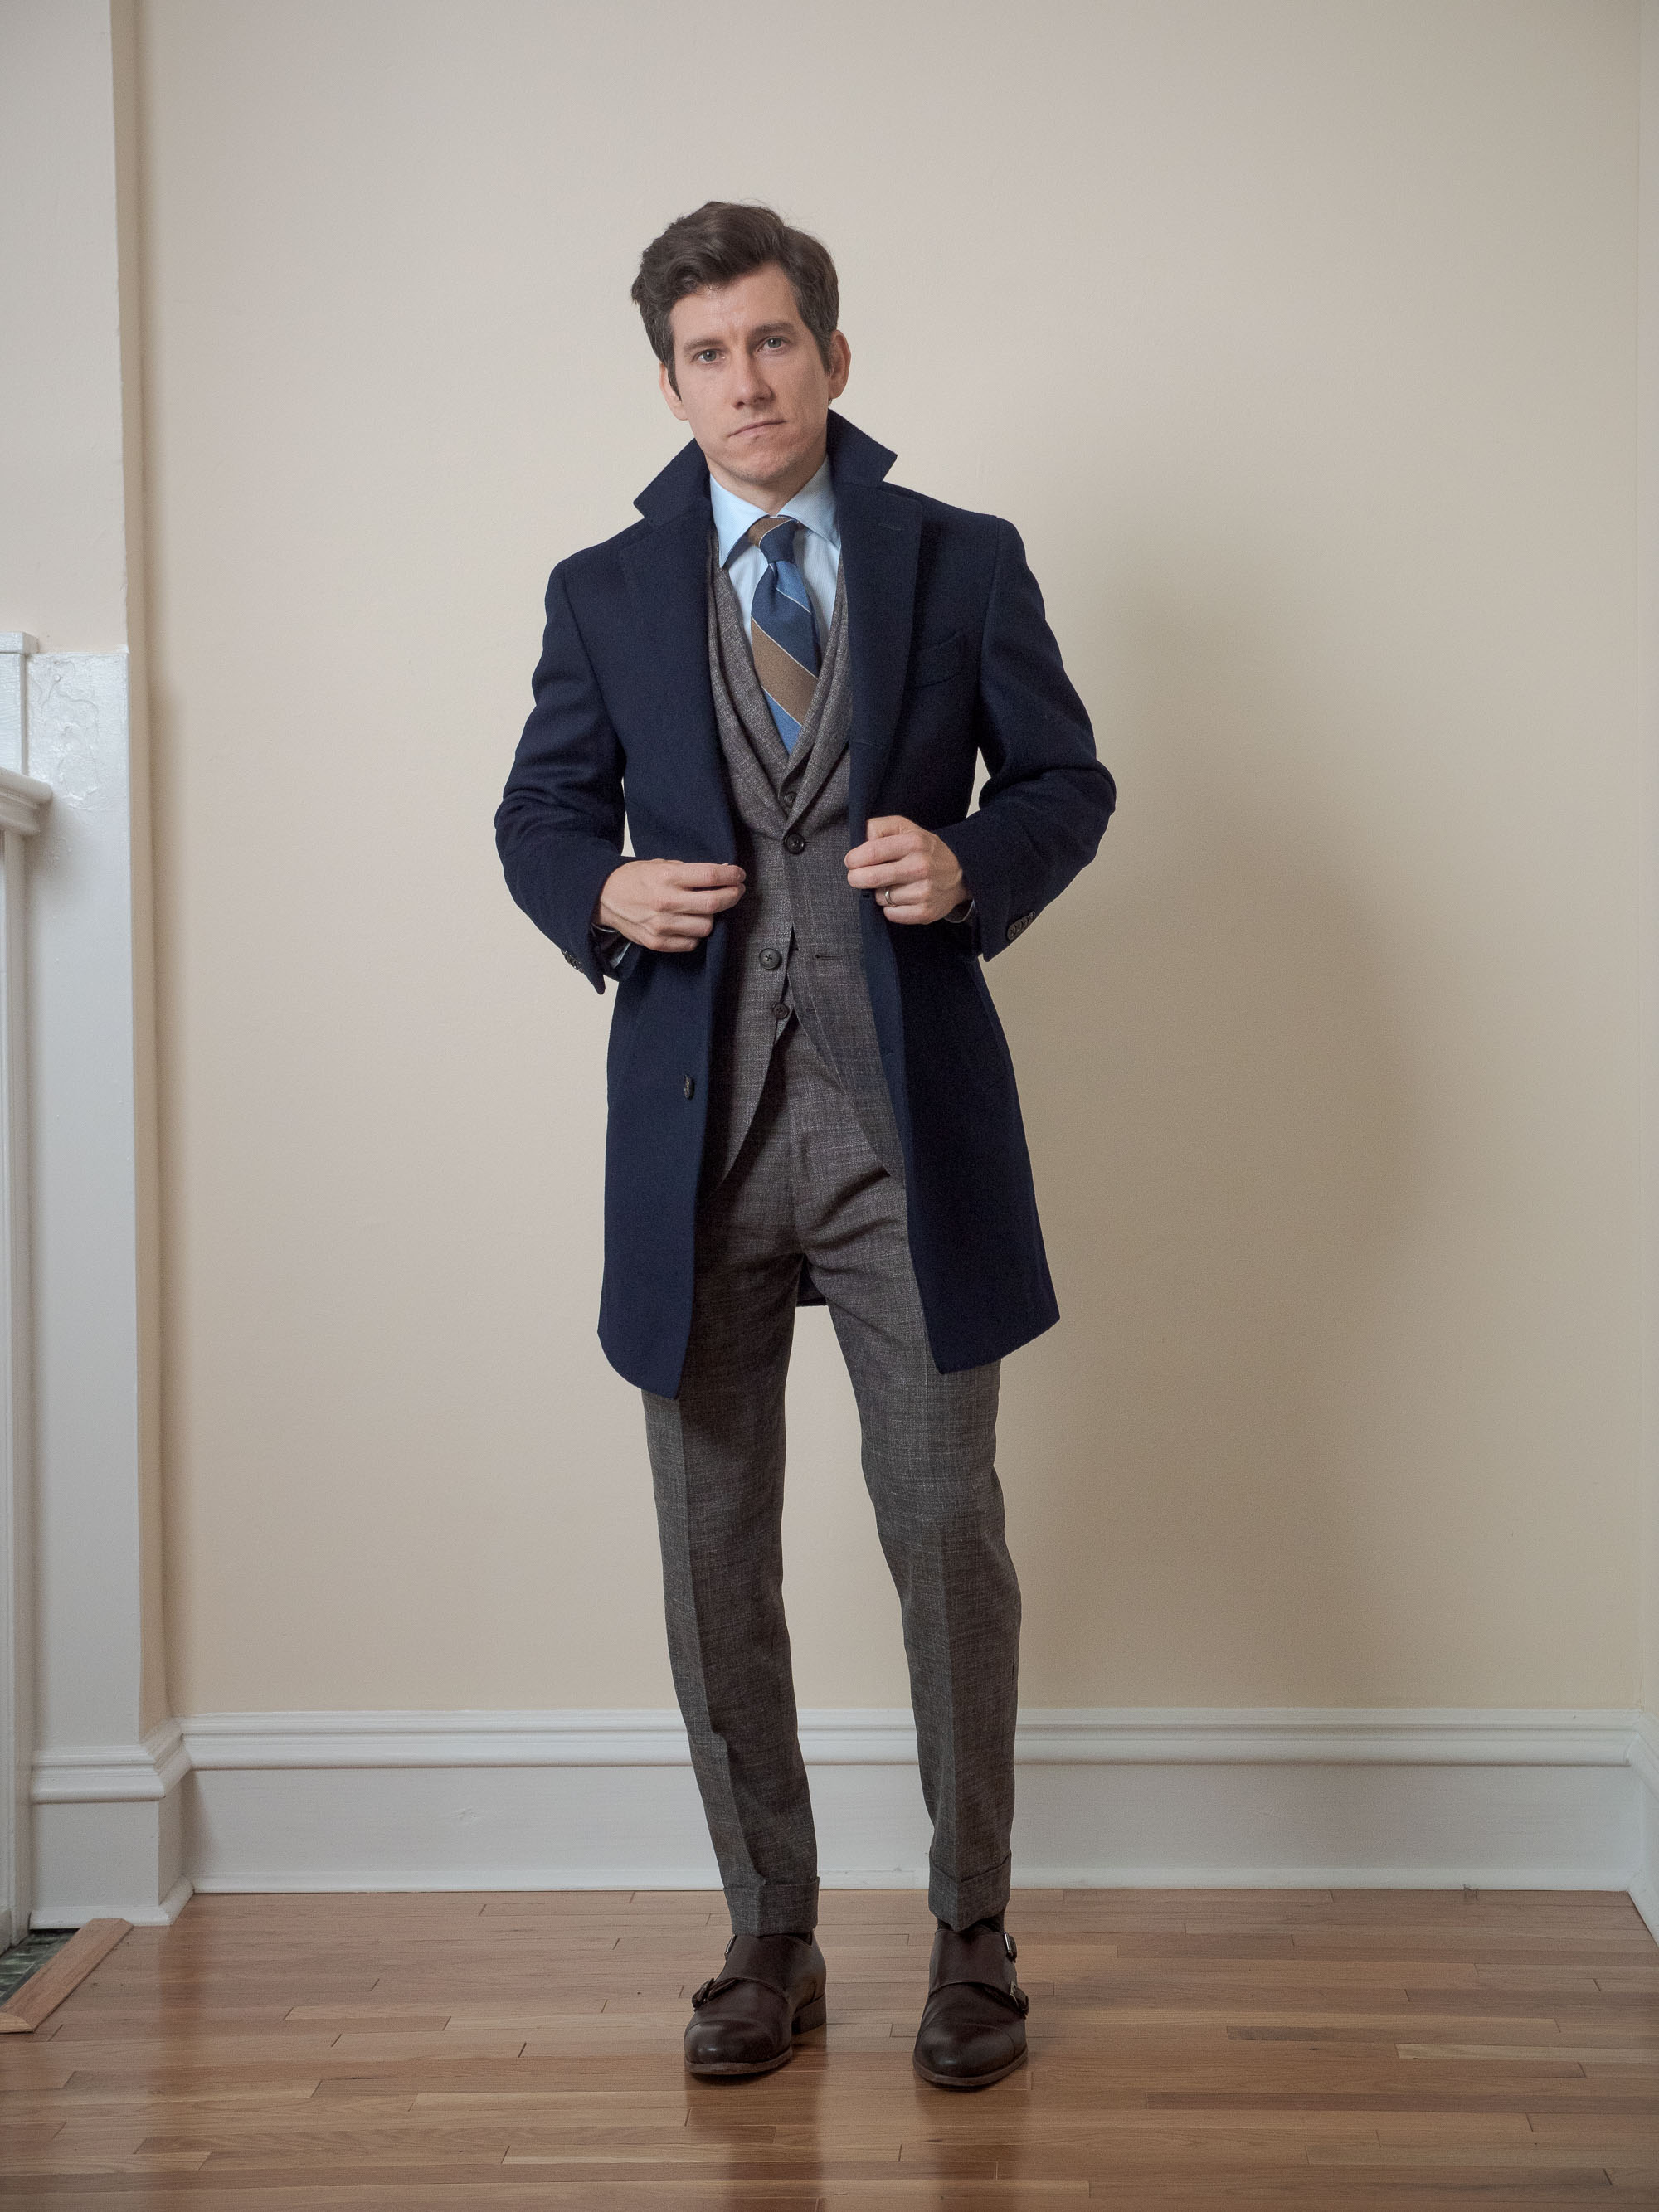 Dressing Down the Topcoat - Keys To Style